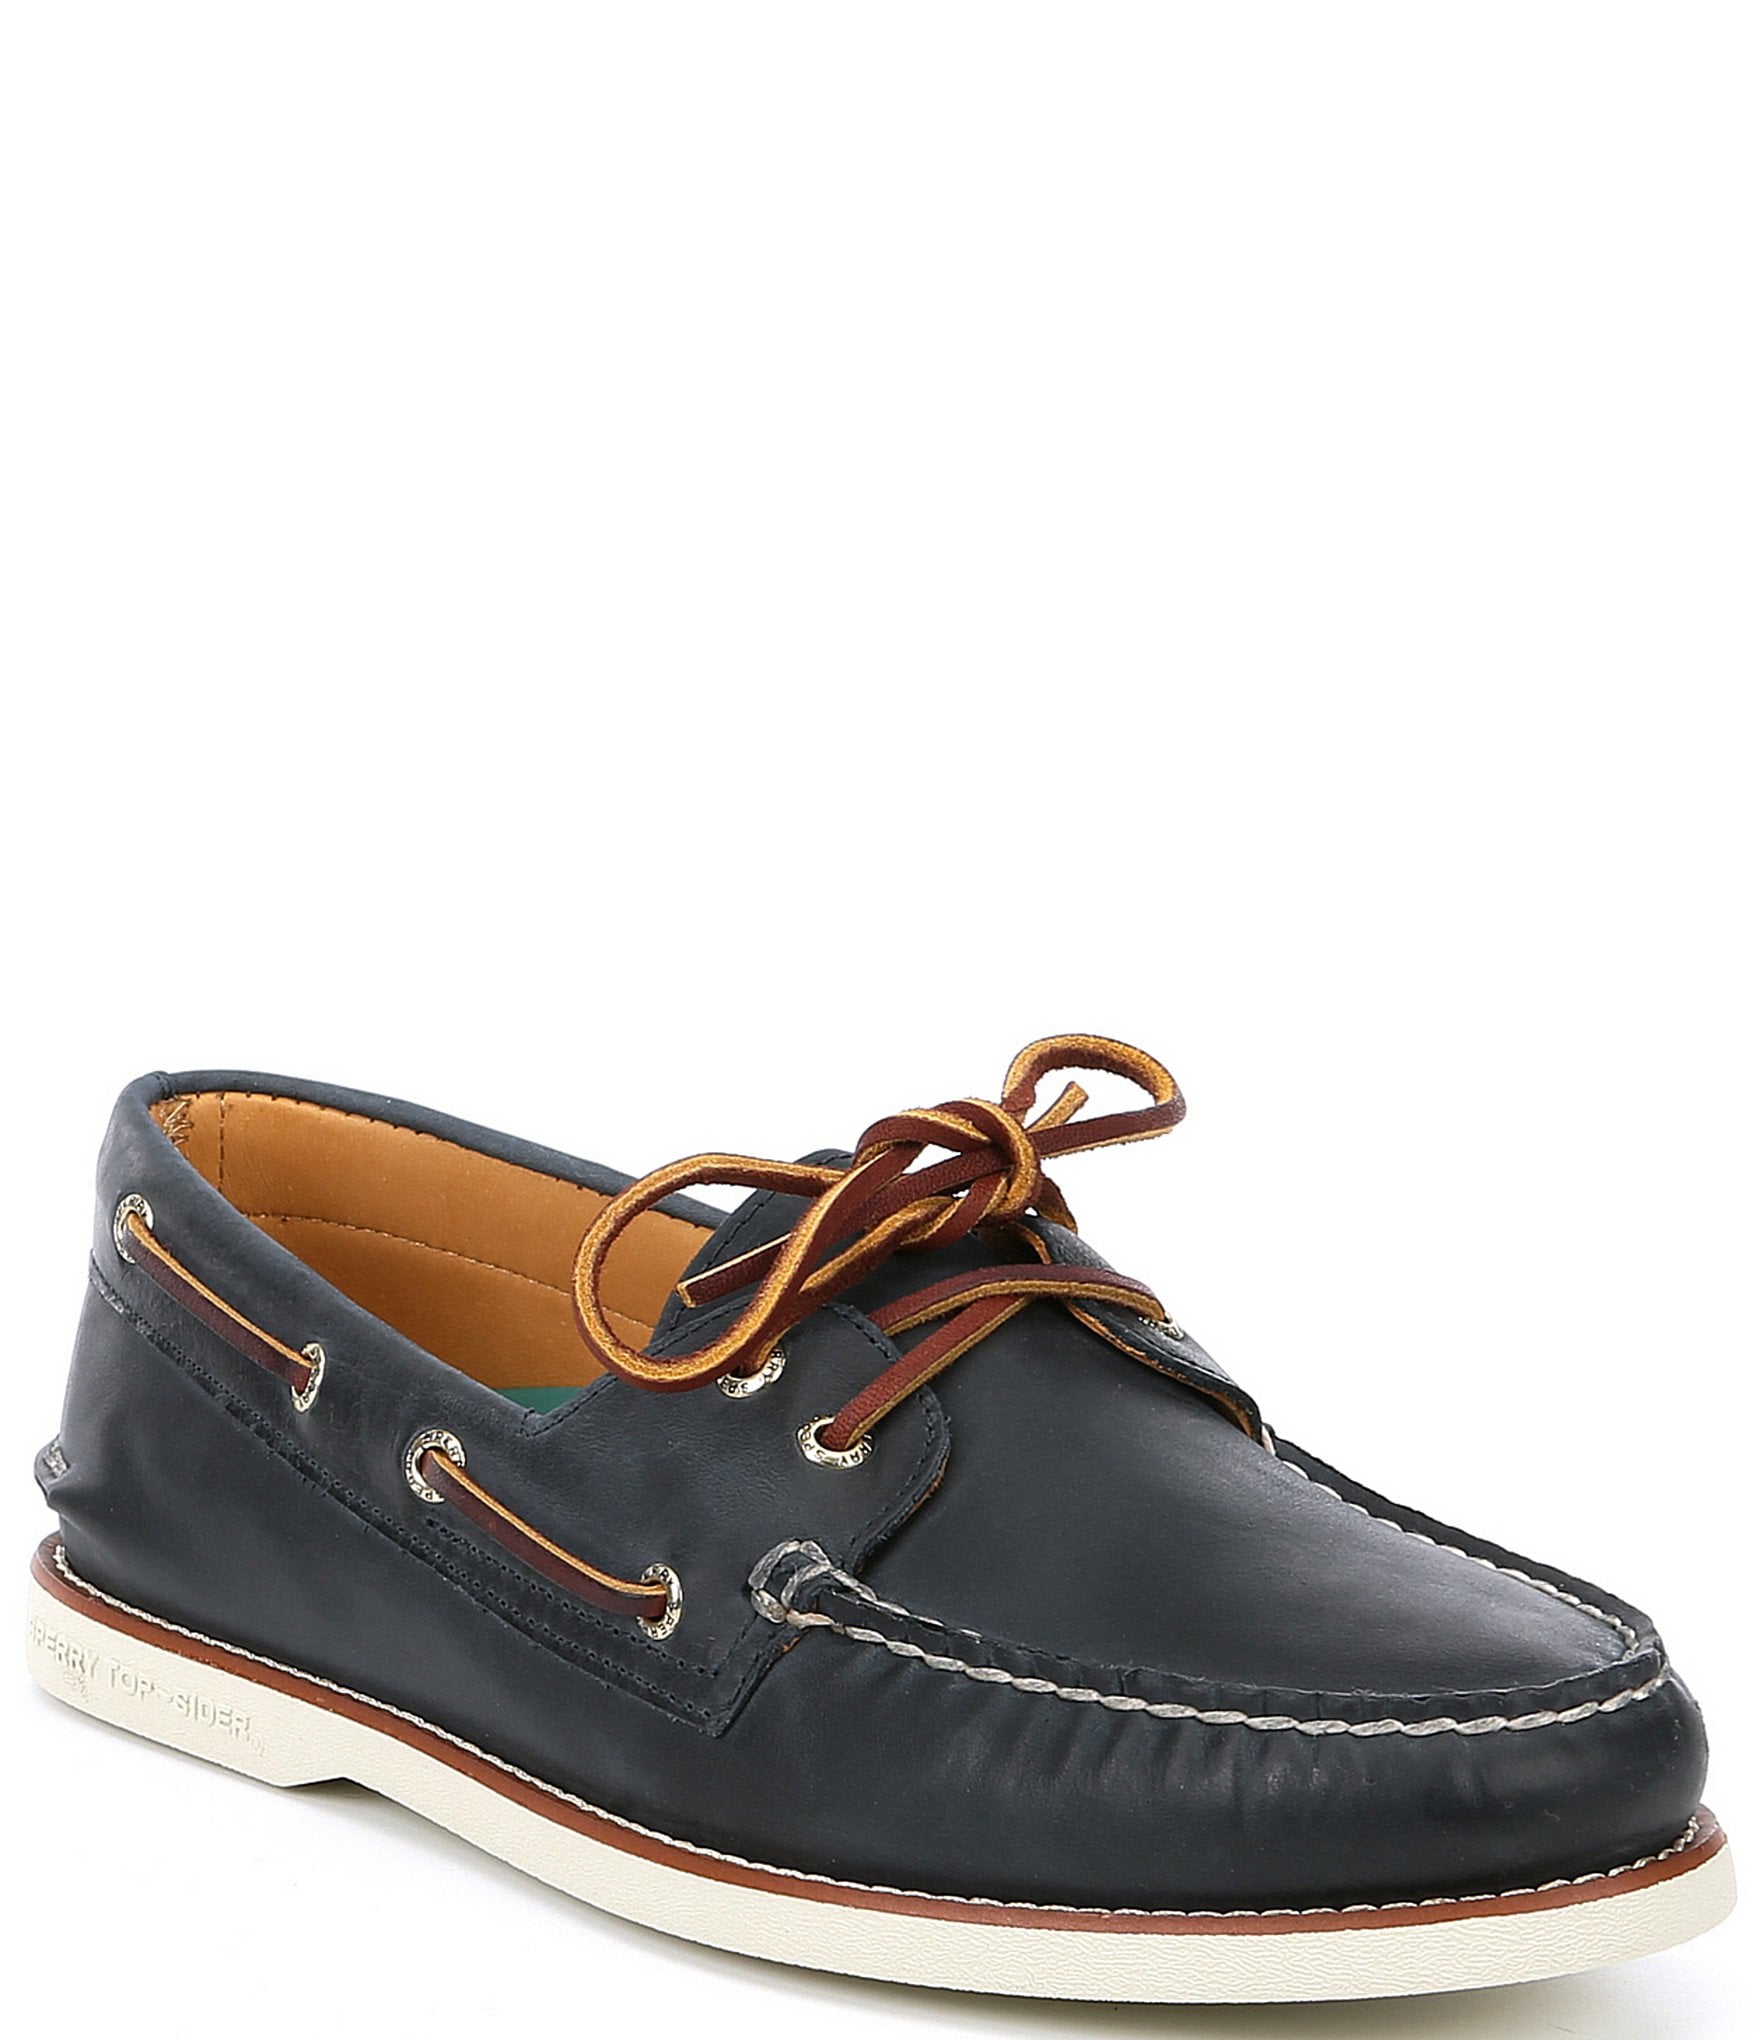 Blue Suede Boat Shoes Mens | lupon.gov.ph